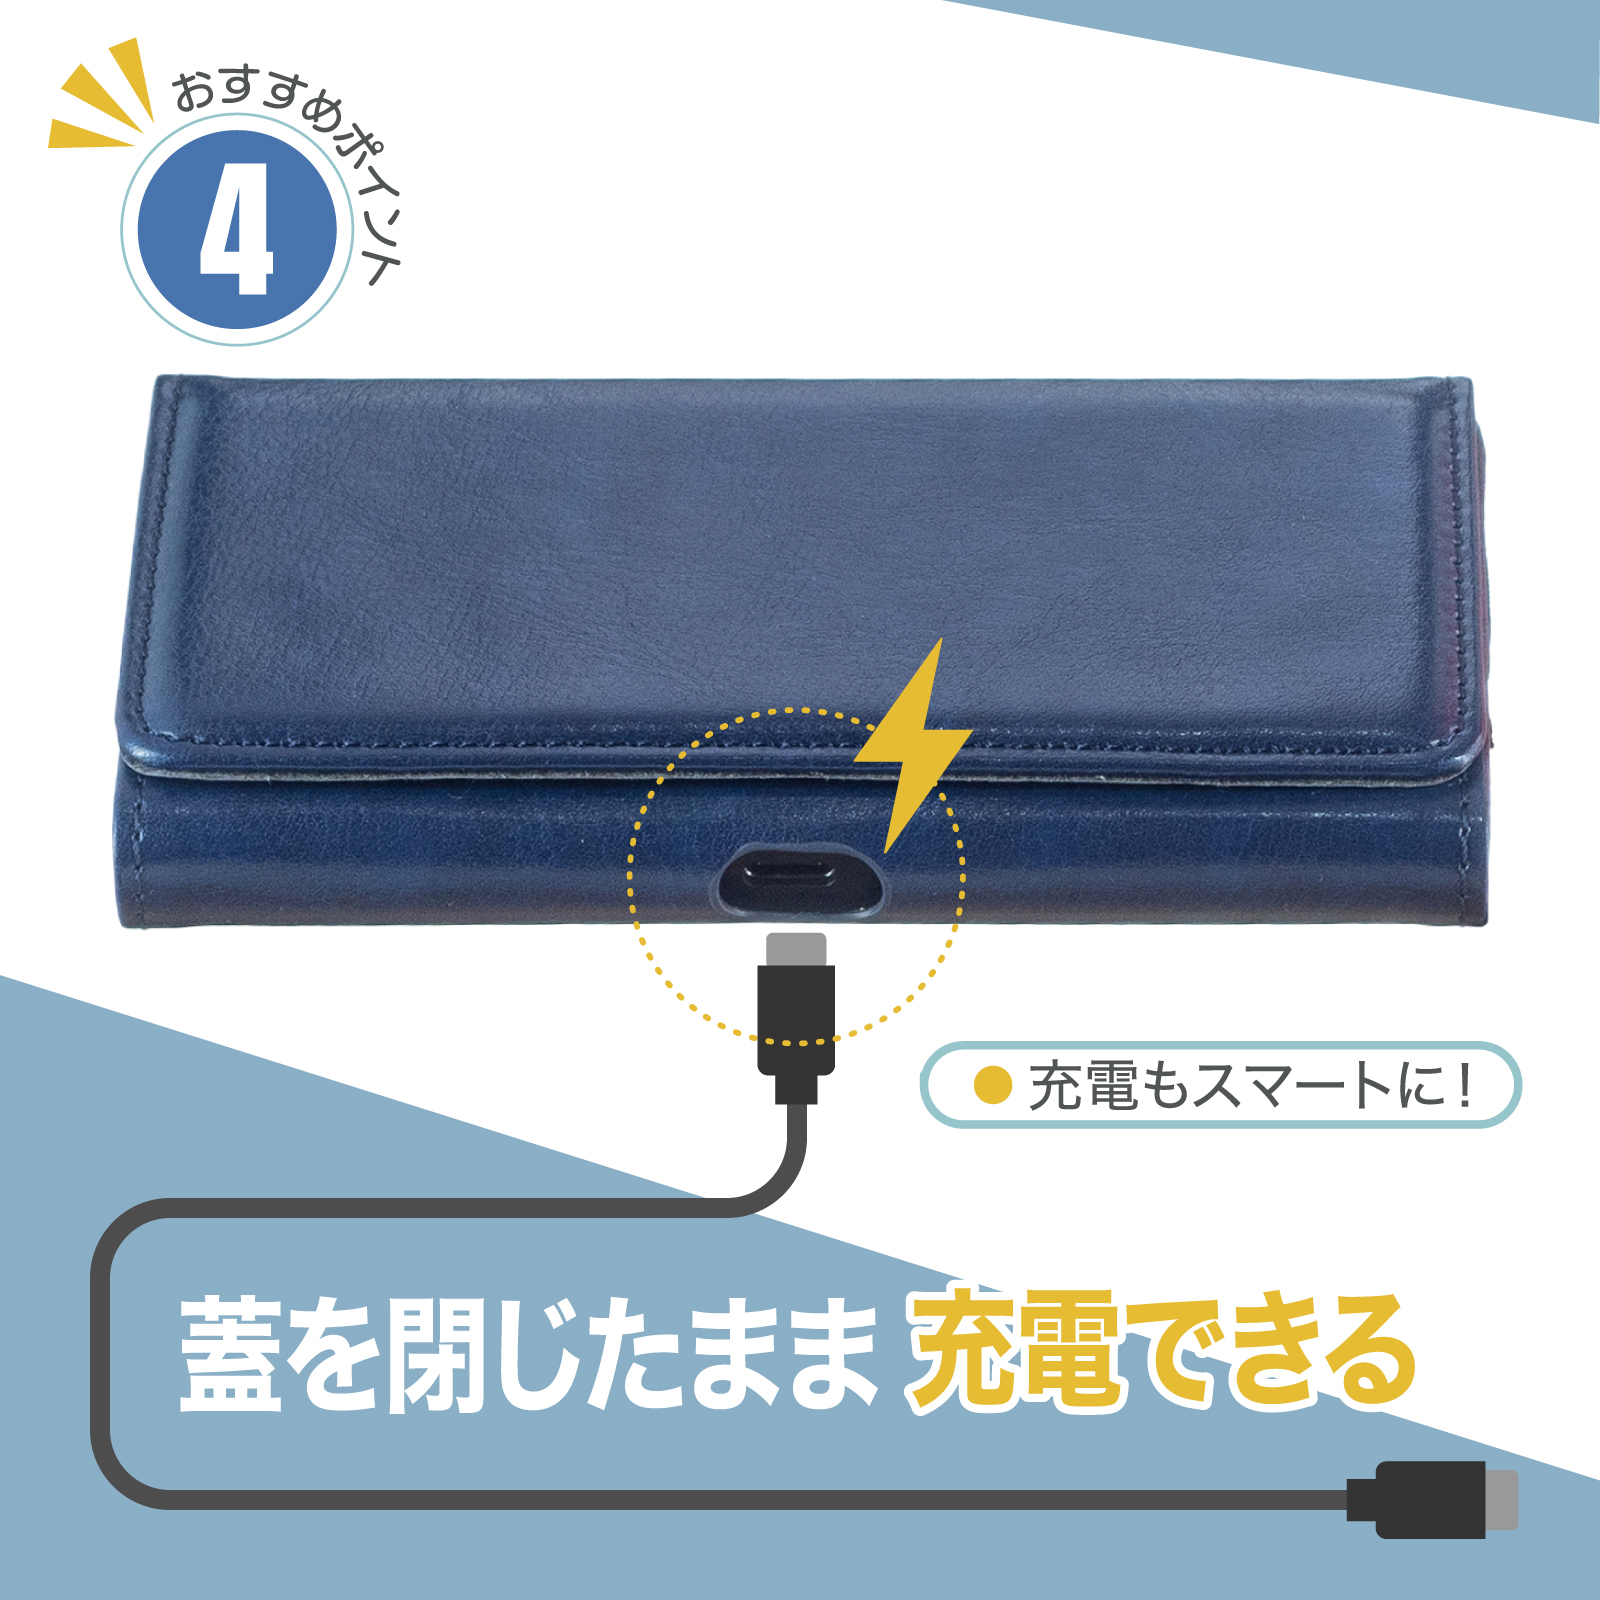 li Charge WiFi MR1 correspondence case cover notebook leather f lip gi gusset interchangeable goods 